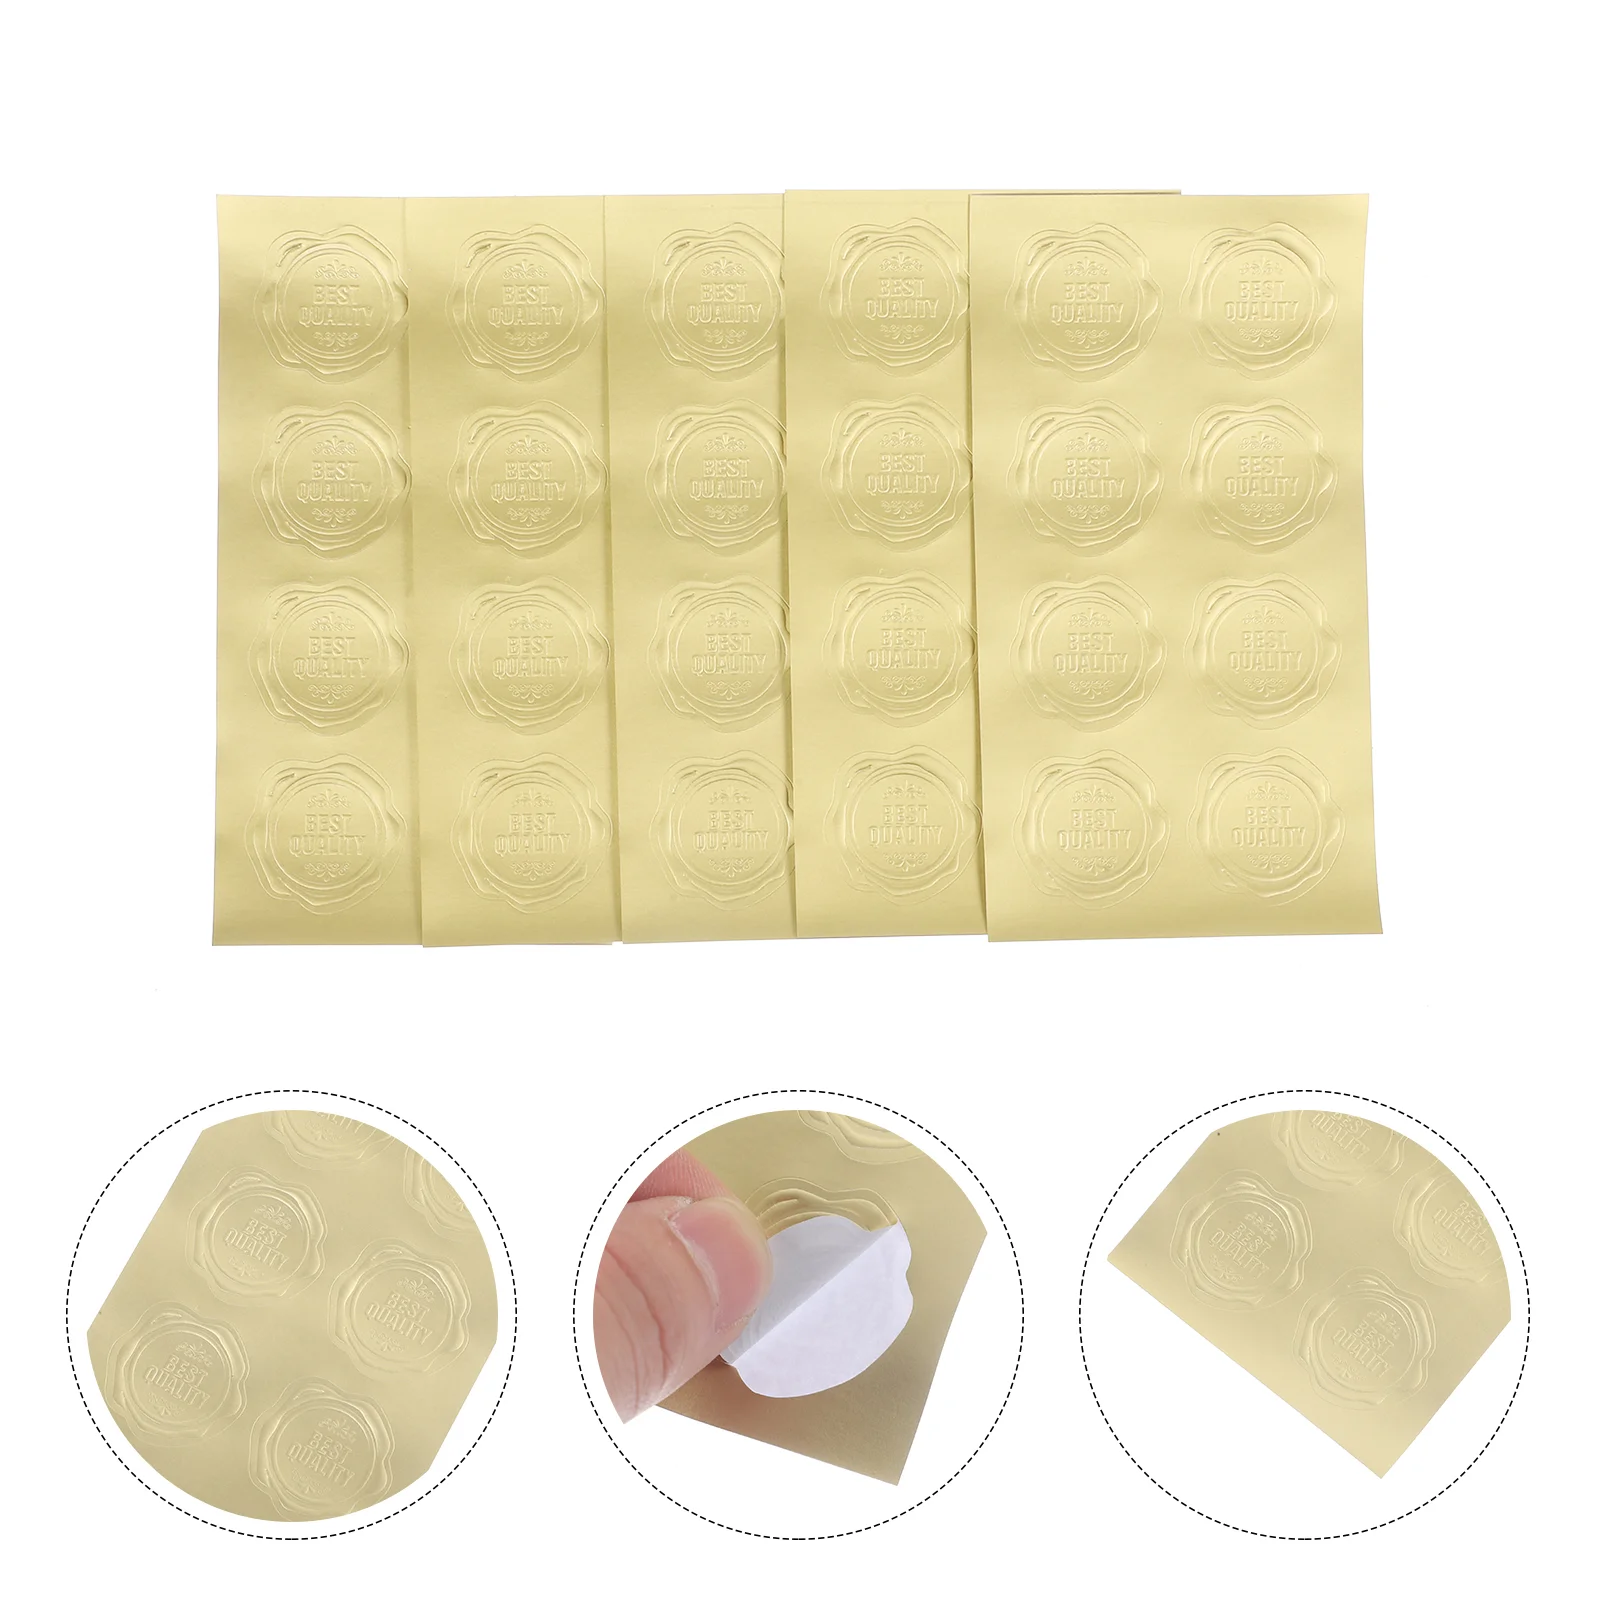 20 Sheets Embossed Fire Seal Sticker Goldendoodle Gifts Pvc Self-adhesive Wax Stickers